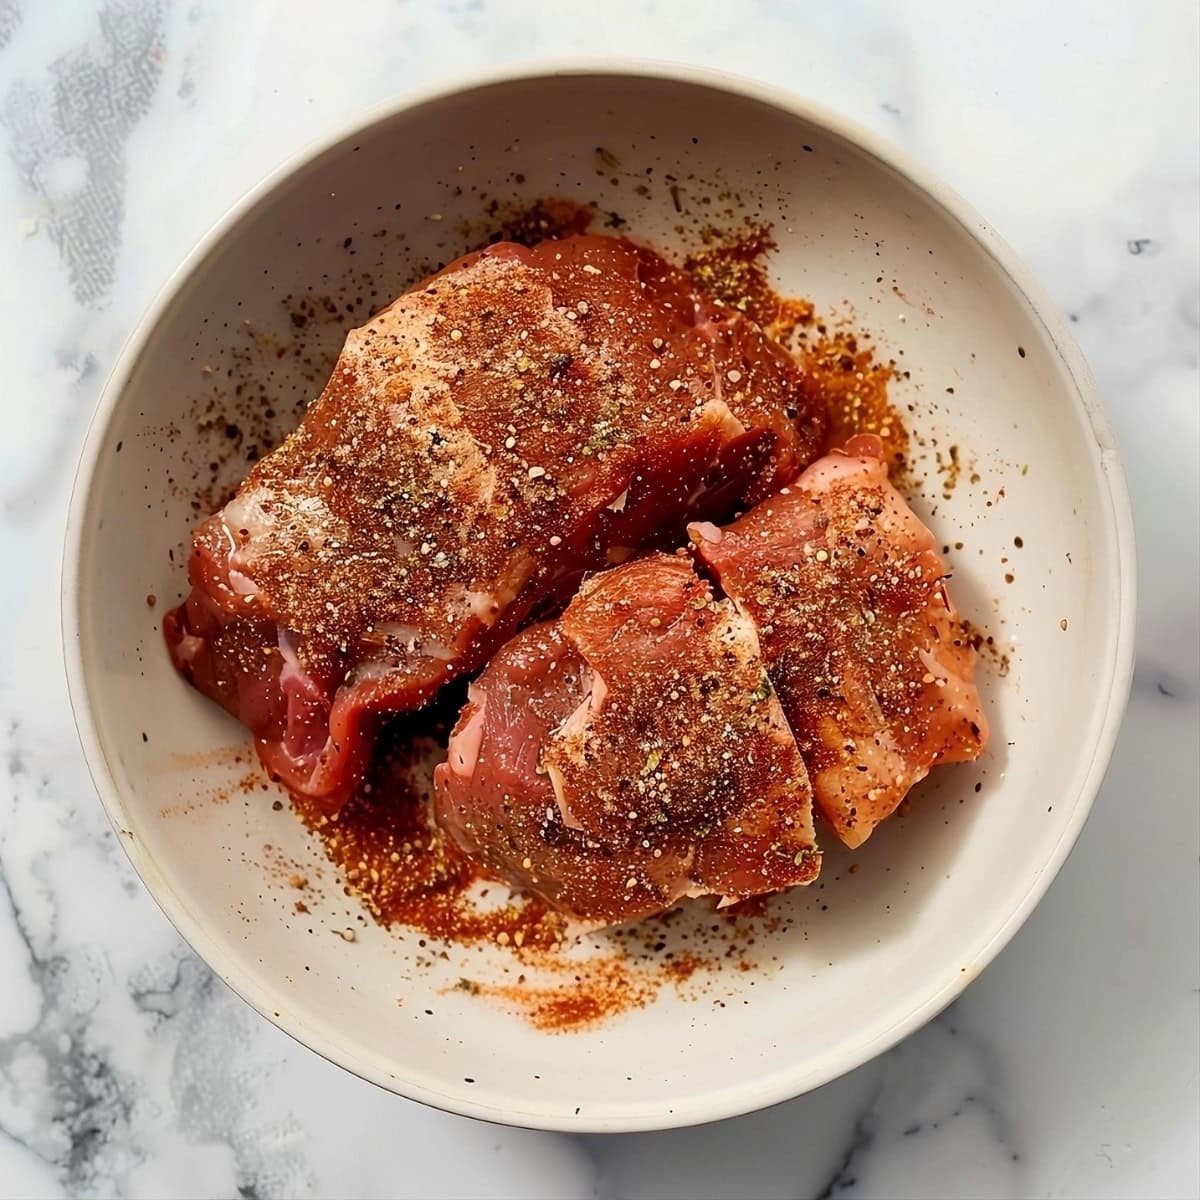 Seasoned raw pork meat with dry rub spices in a bowl on a white marble surface.